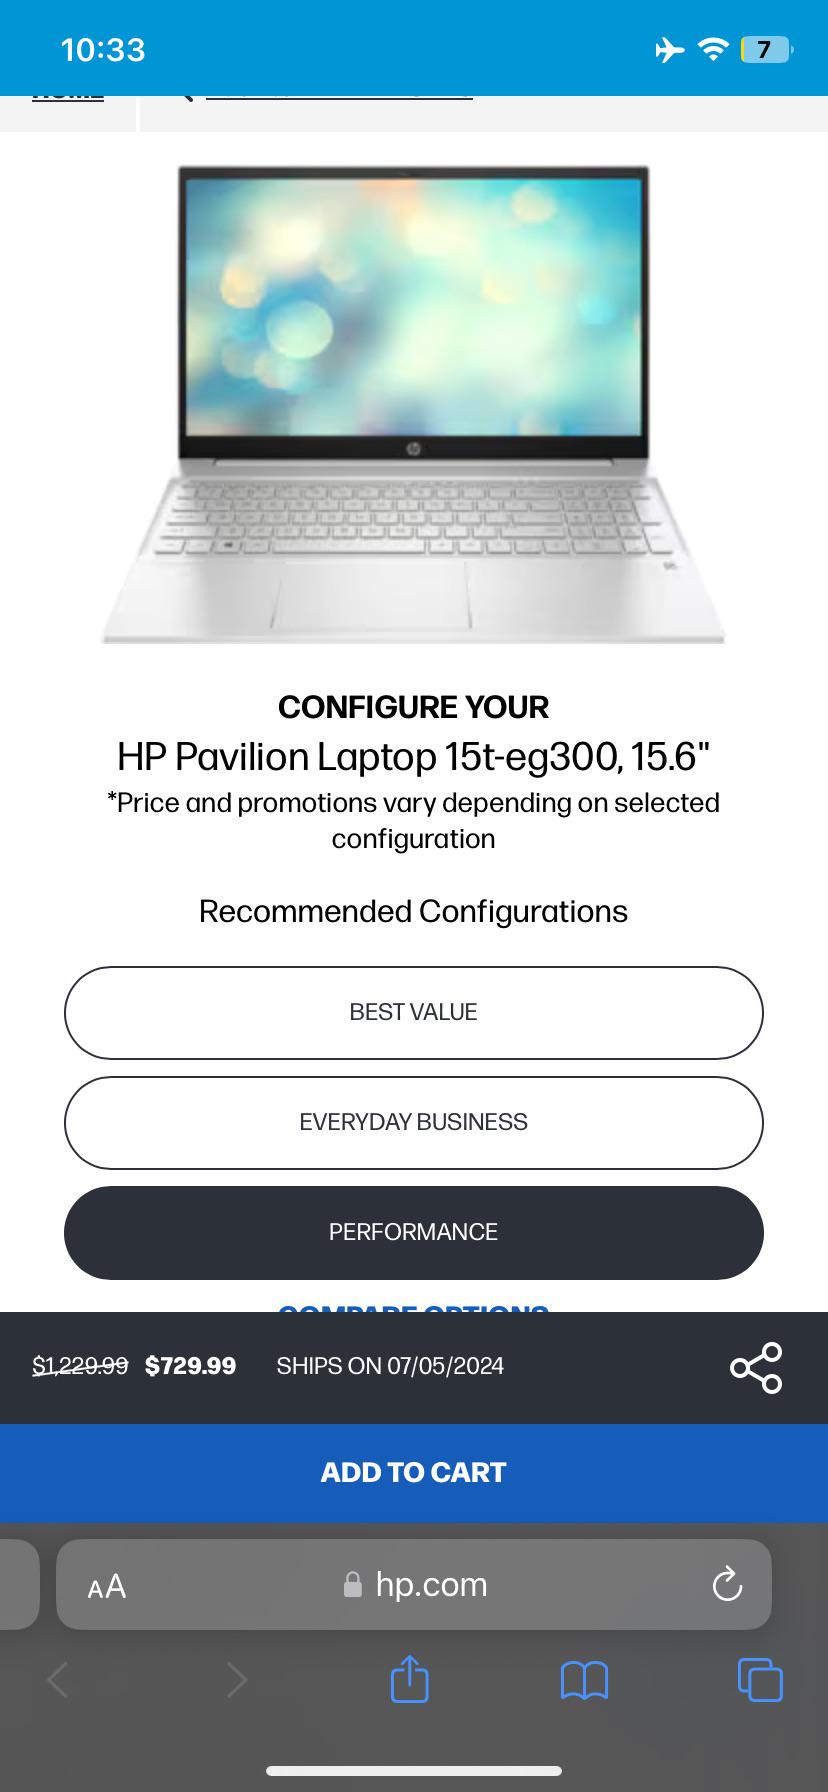 r/laptops - need a laptop for school but also for personal use. Wondering if this is good?